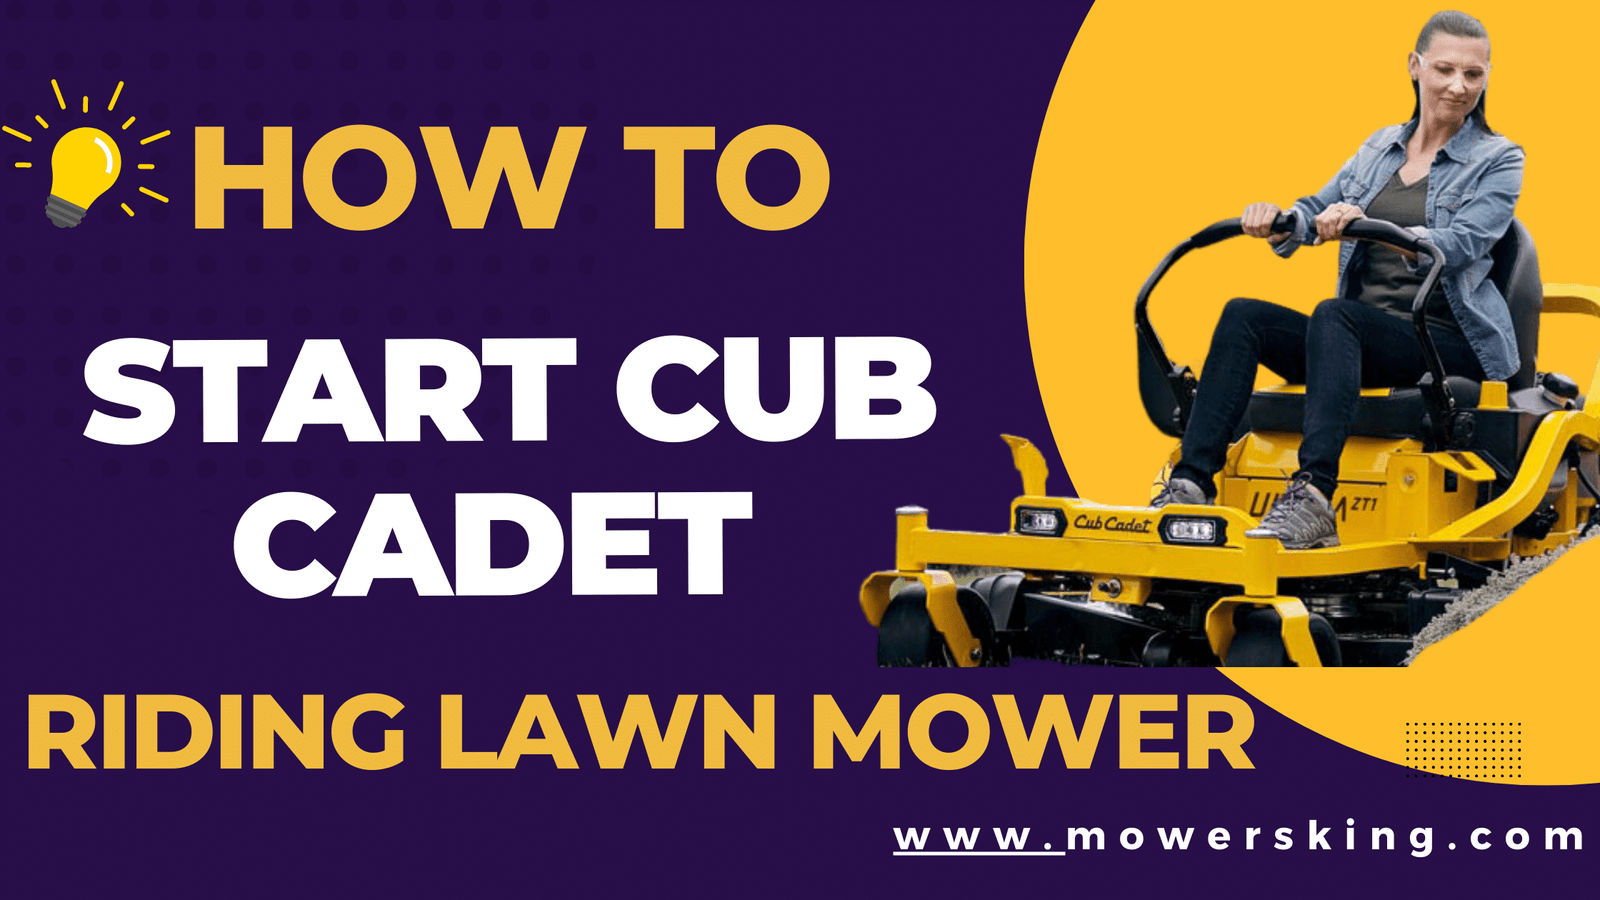 How To Start Cub Cadet Riding Lawn Mower